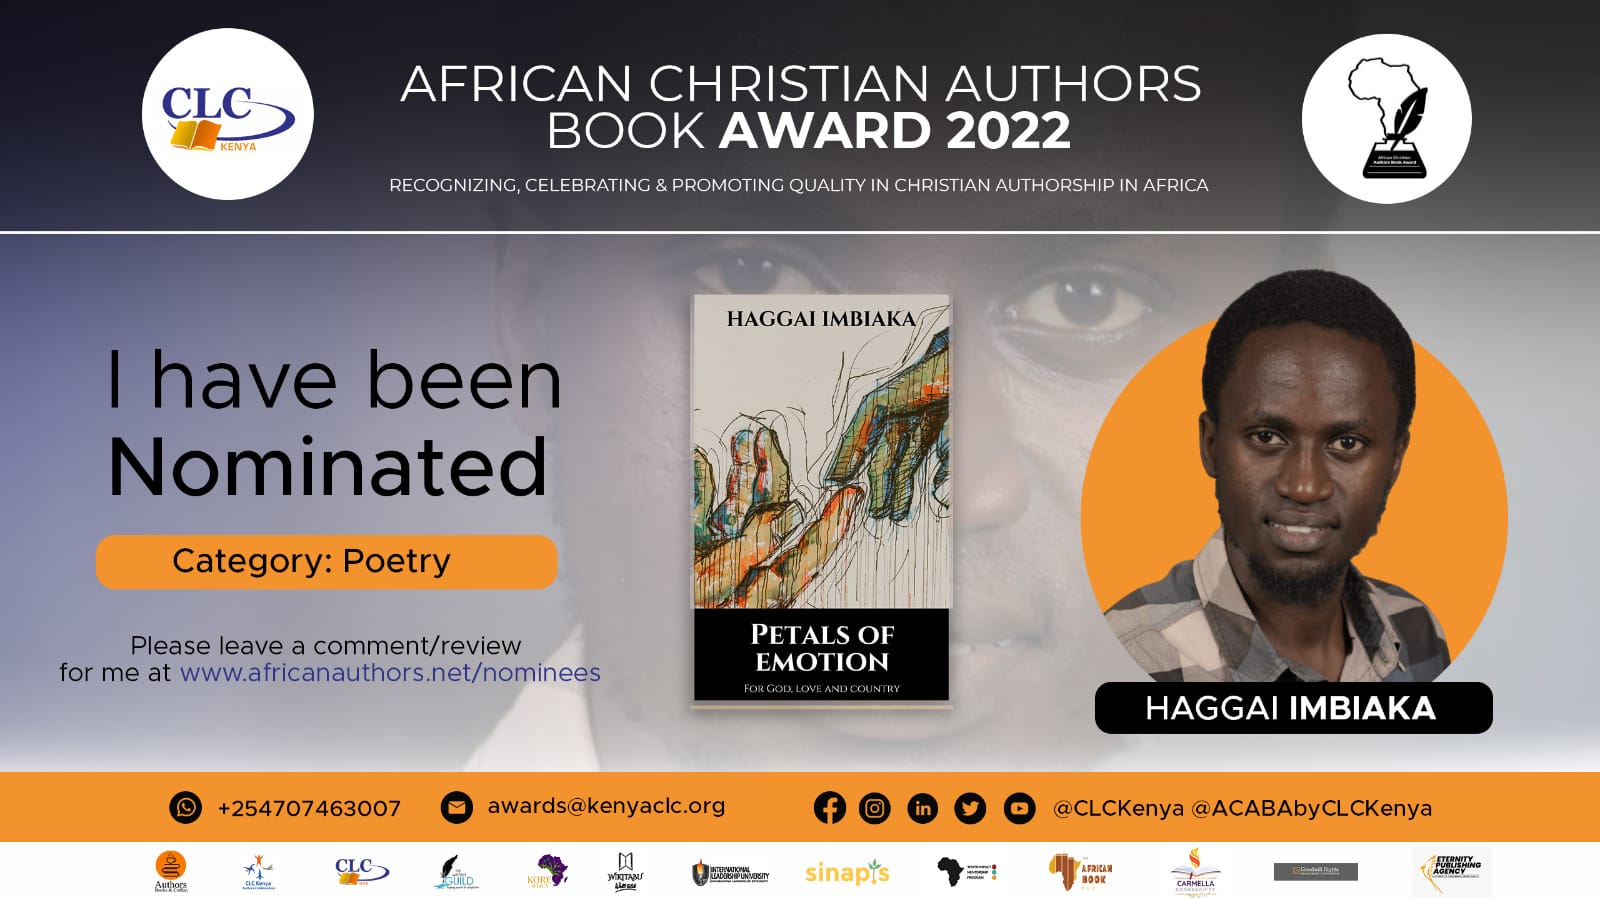 Born And Bred In Kibera Slums, Haggai Would Pour His Heart Out Through Poetry, Ushering In His Authorship Journey